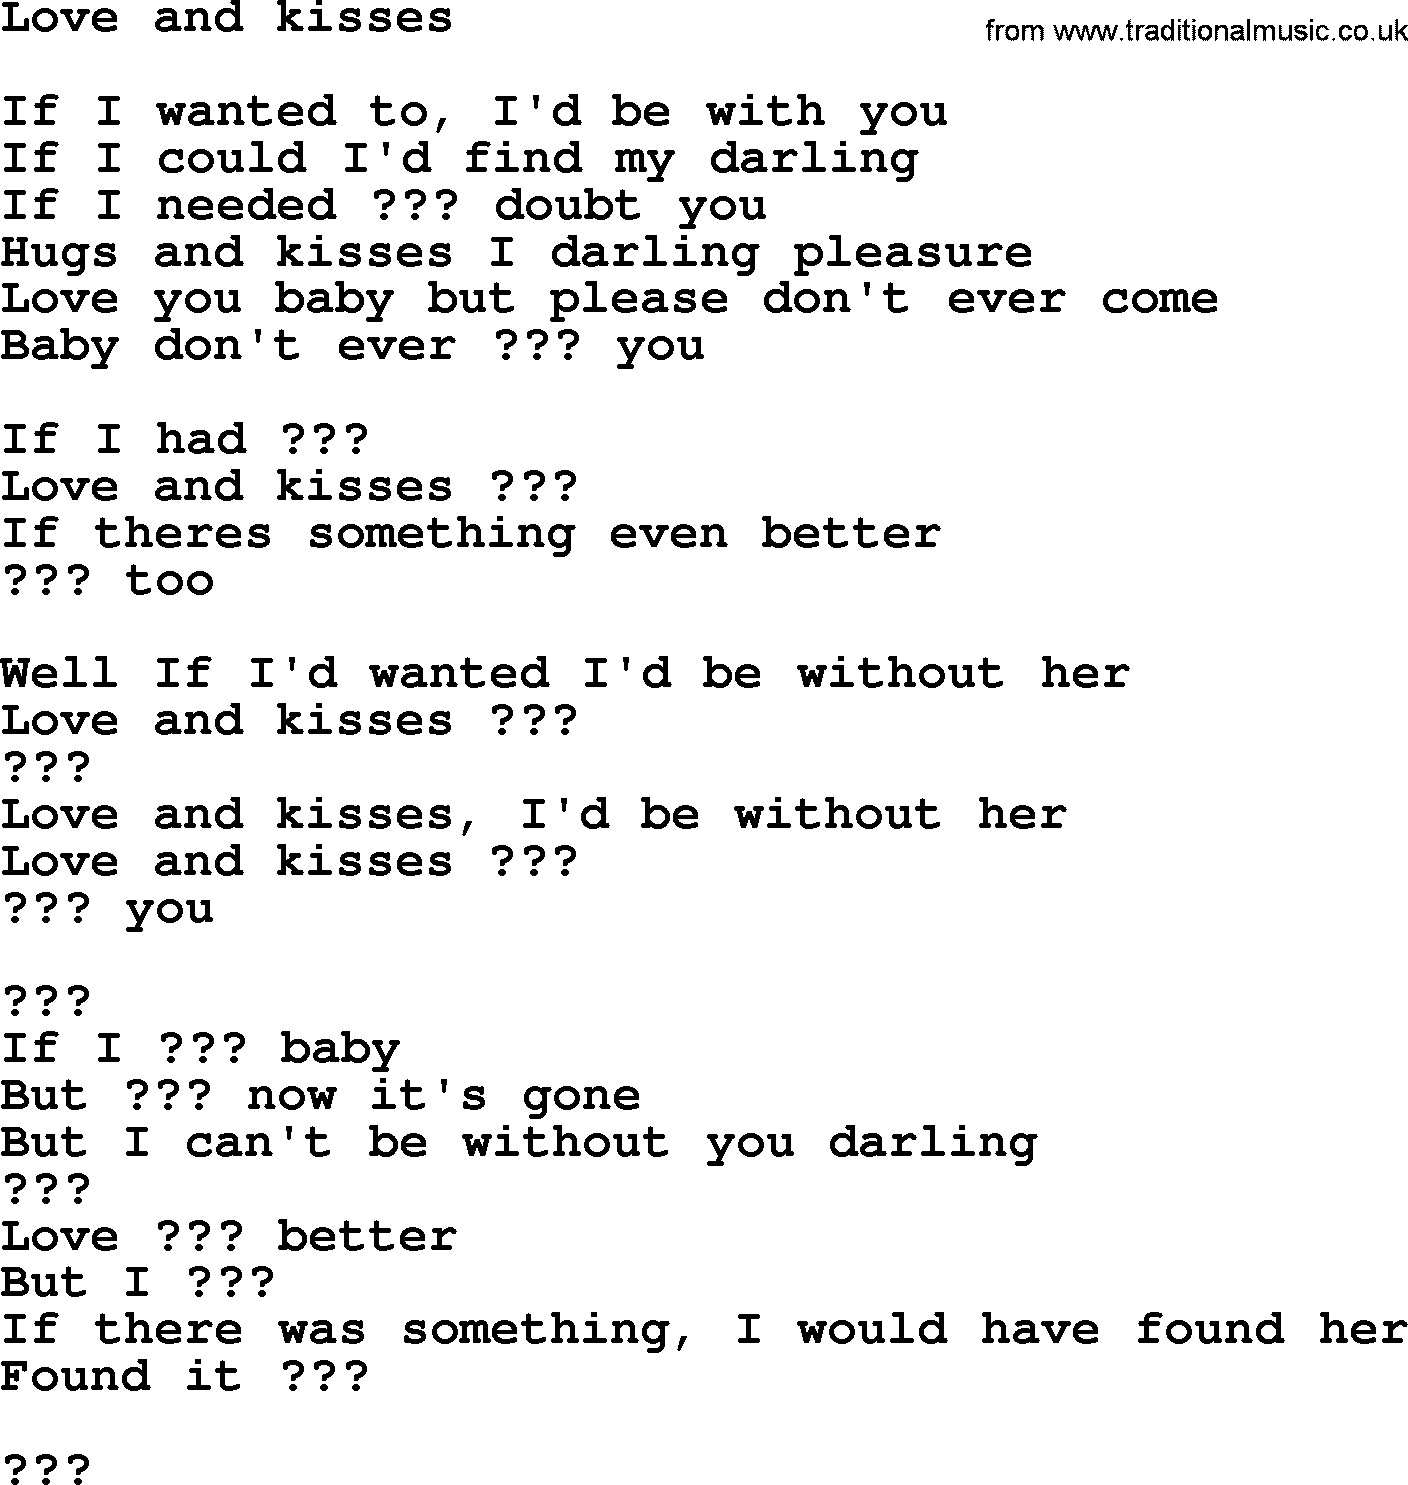 Bruce Springsteen song: Love And Kisses lyrics